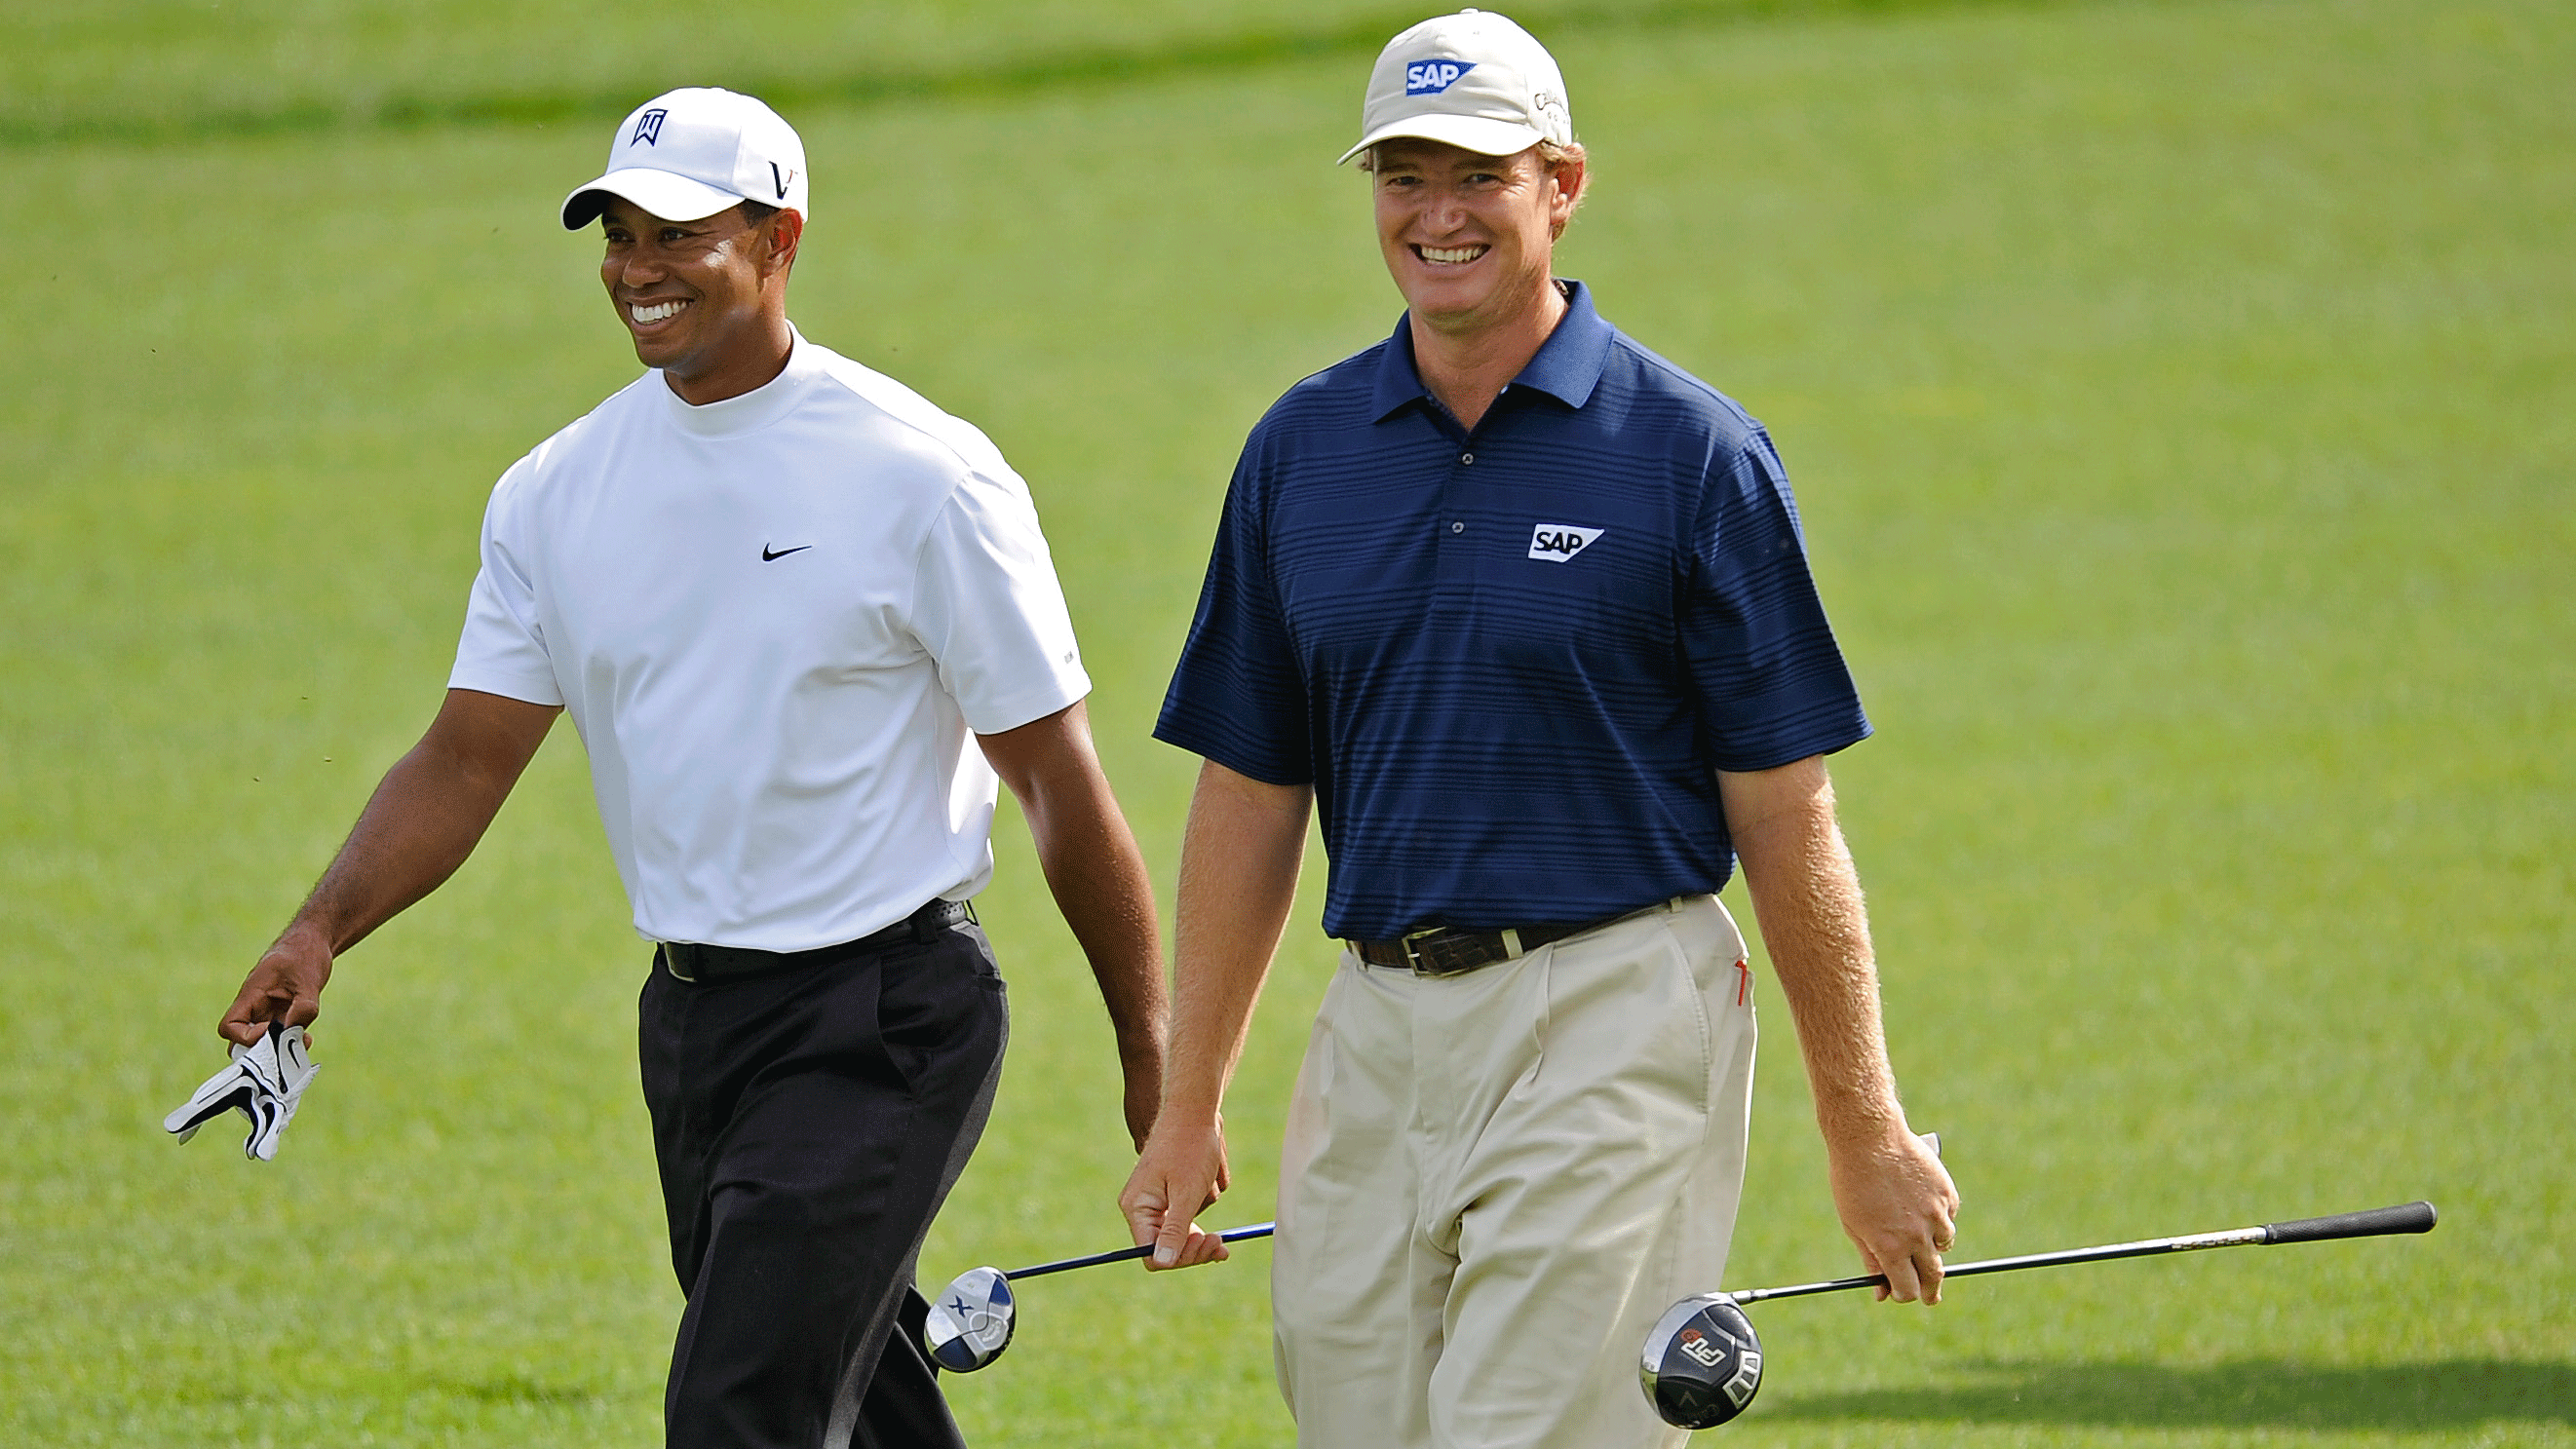 "He Asked Me What I Thought Of His Game And If He Was Ready To Turn Pro" – How Ernie Els' Reply To A Young Tiger Woods Changed Professional Golf Forever